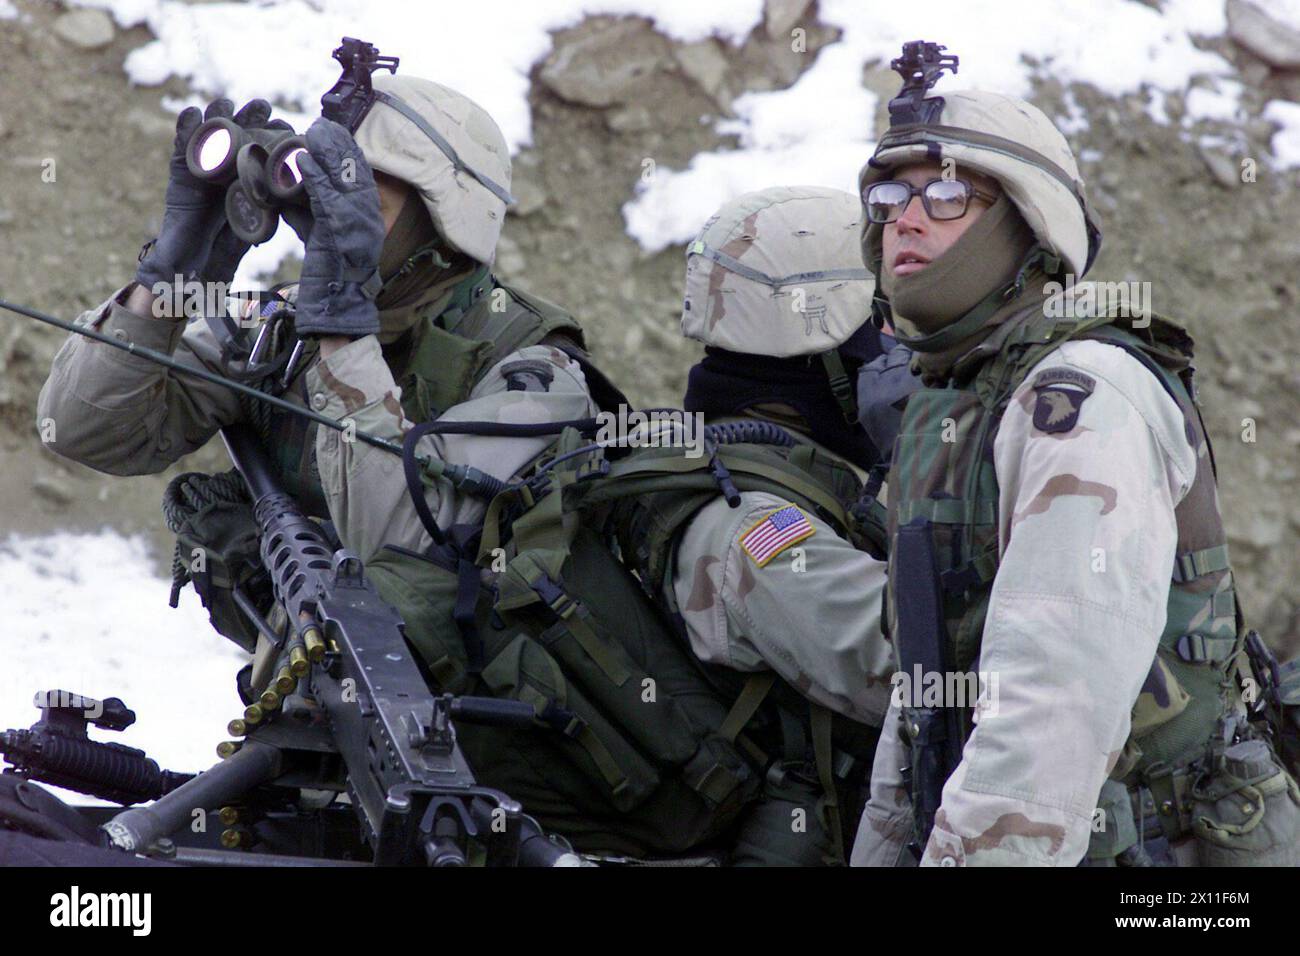 Original Caption: Soldiers from the 1st Battalion, 187th Infantry Regiment, 101st Airborne Division (Air Assault), scan the ridgeline for enemy forces during Operation Anaconda (Afghanistan) March 4 2002. Stock Photo